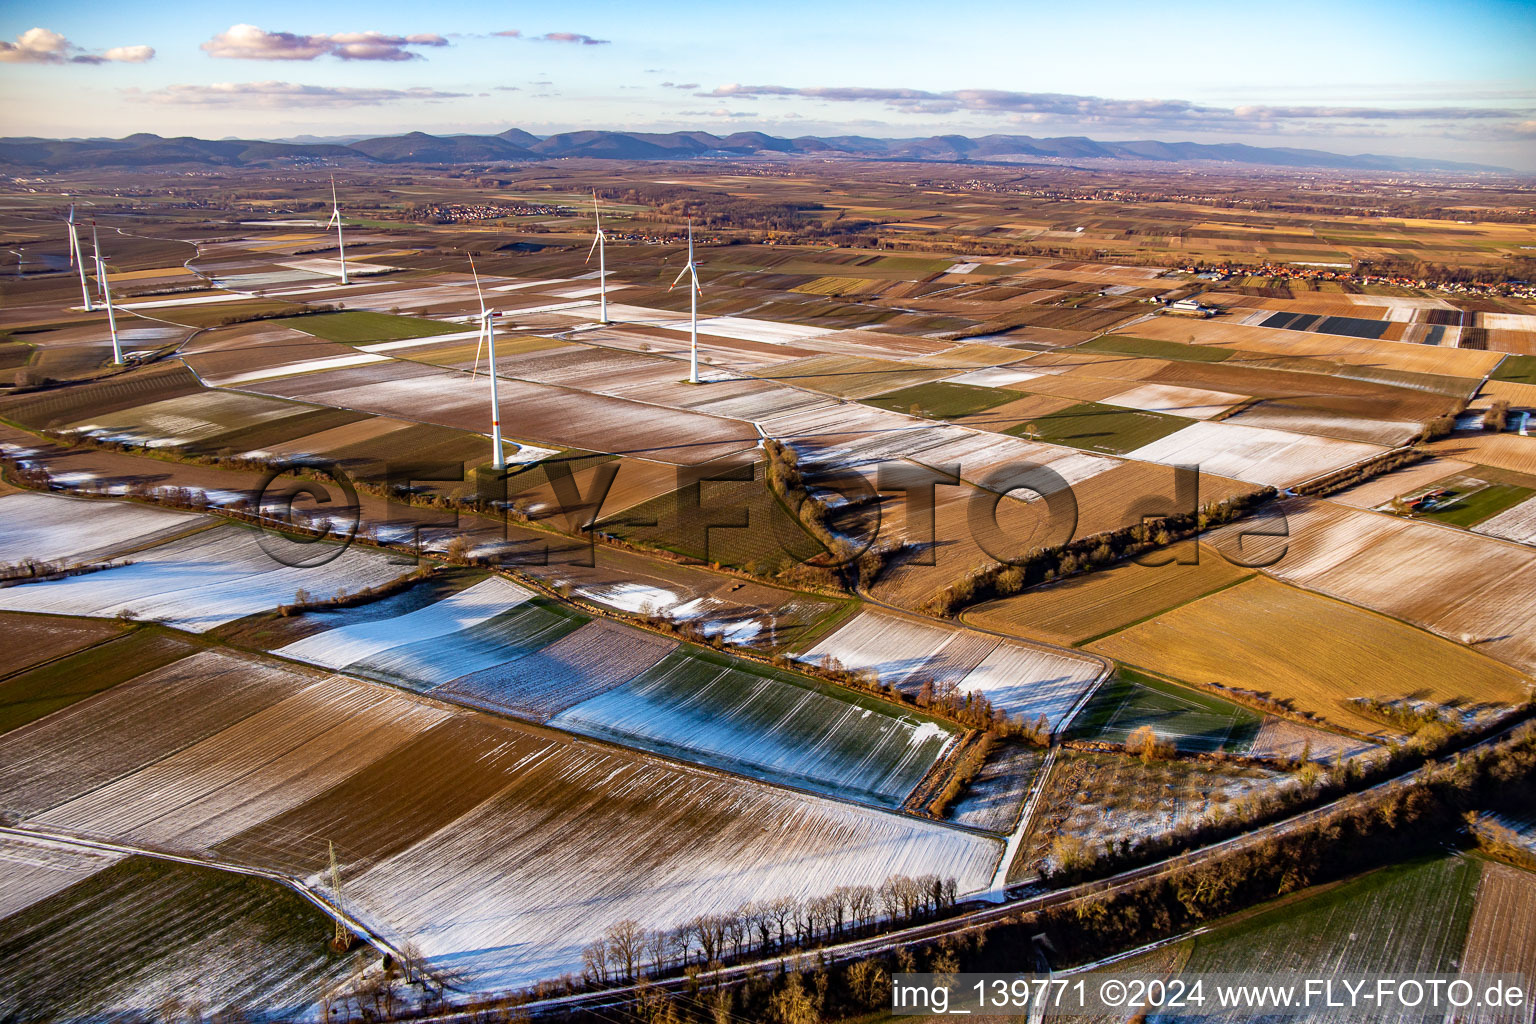 Field structures and shadows in winter when there is snow at the wind farm Freckenfeld in Freckenfeld in the state Rhineland-Palatinate, Germany